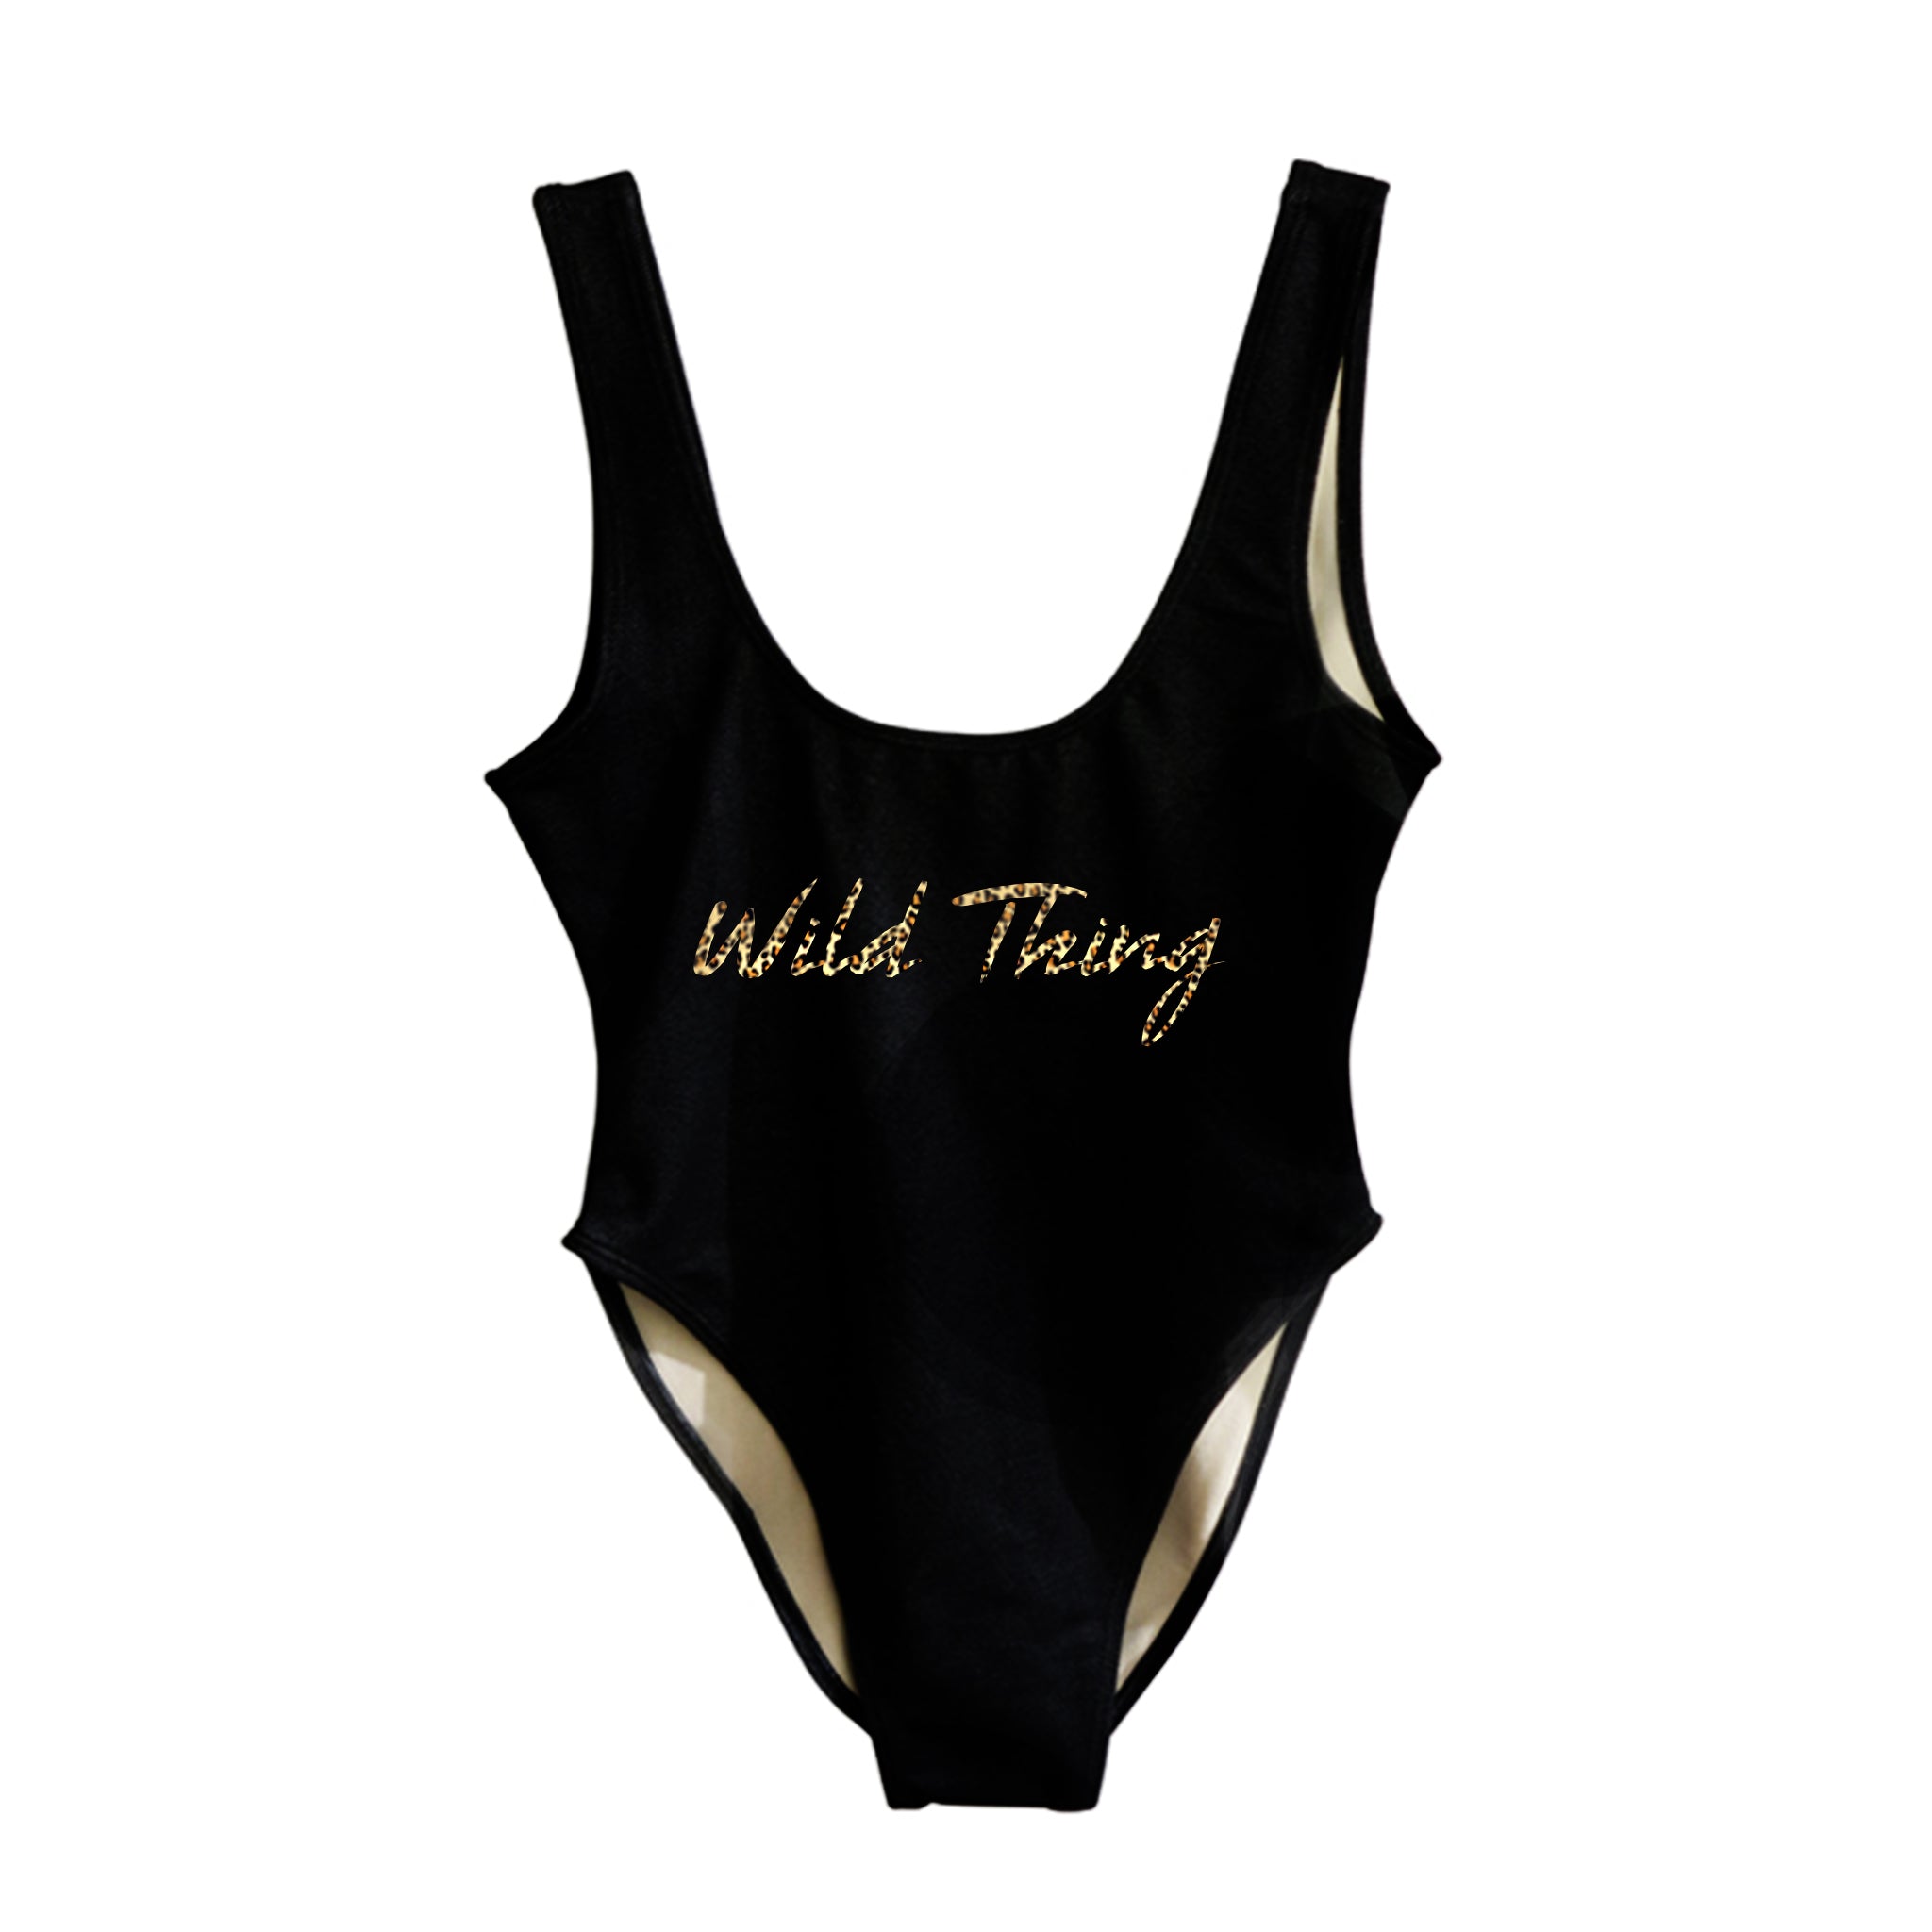 WILD THING W/ CHEETAH TEXT [SWIMSUIT]